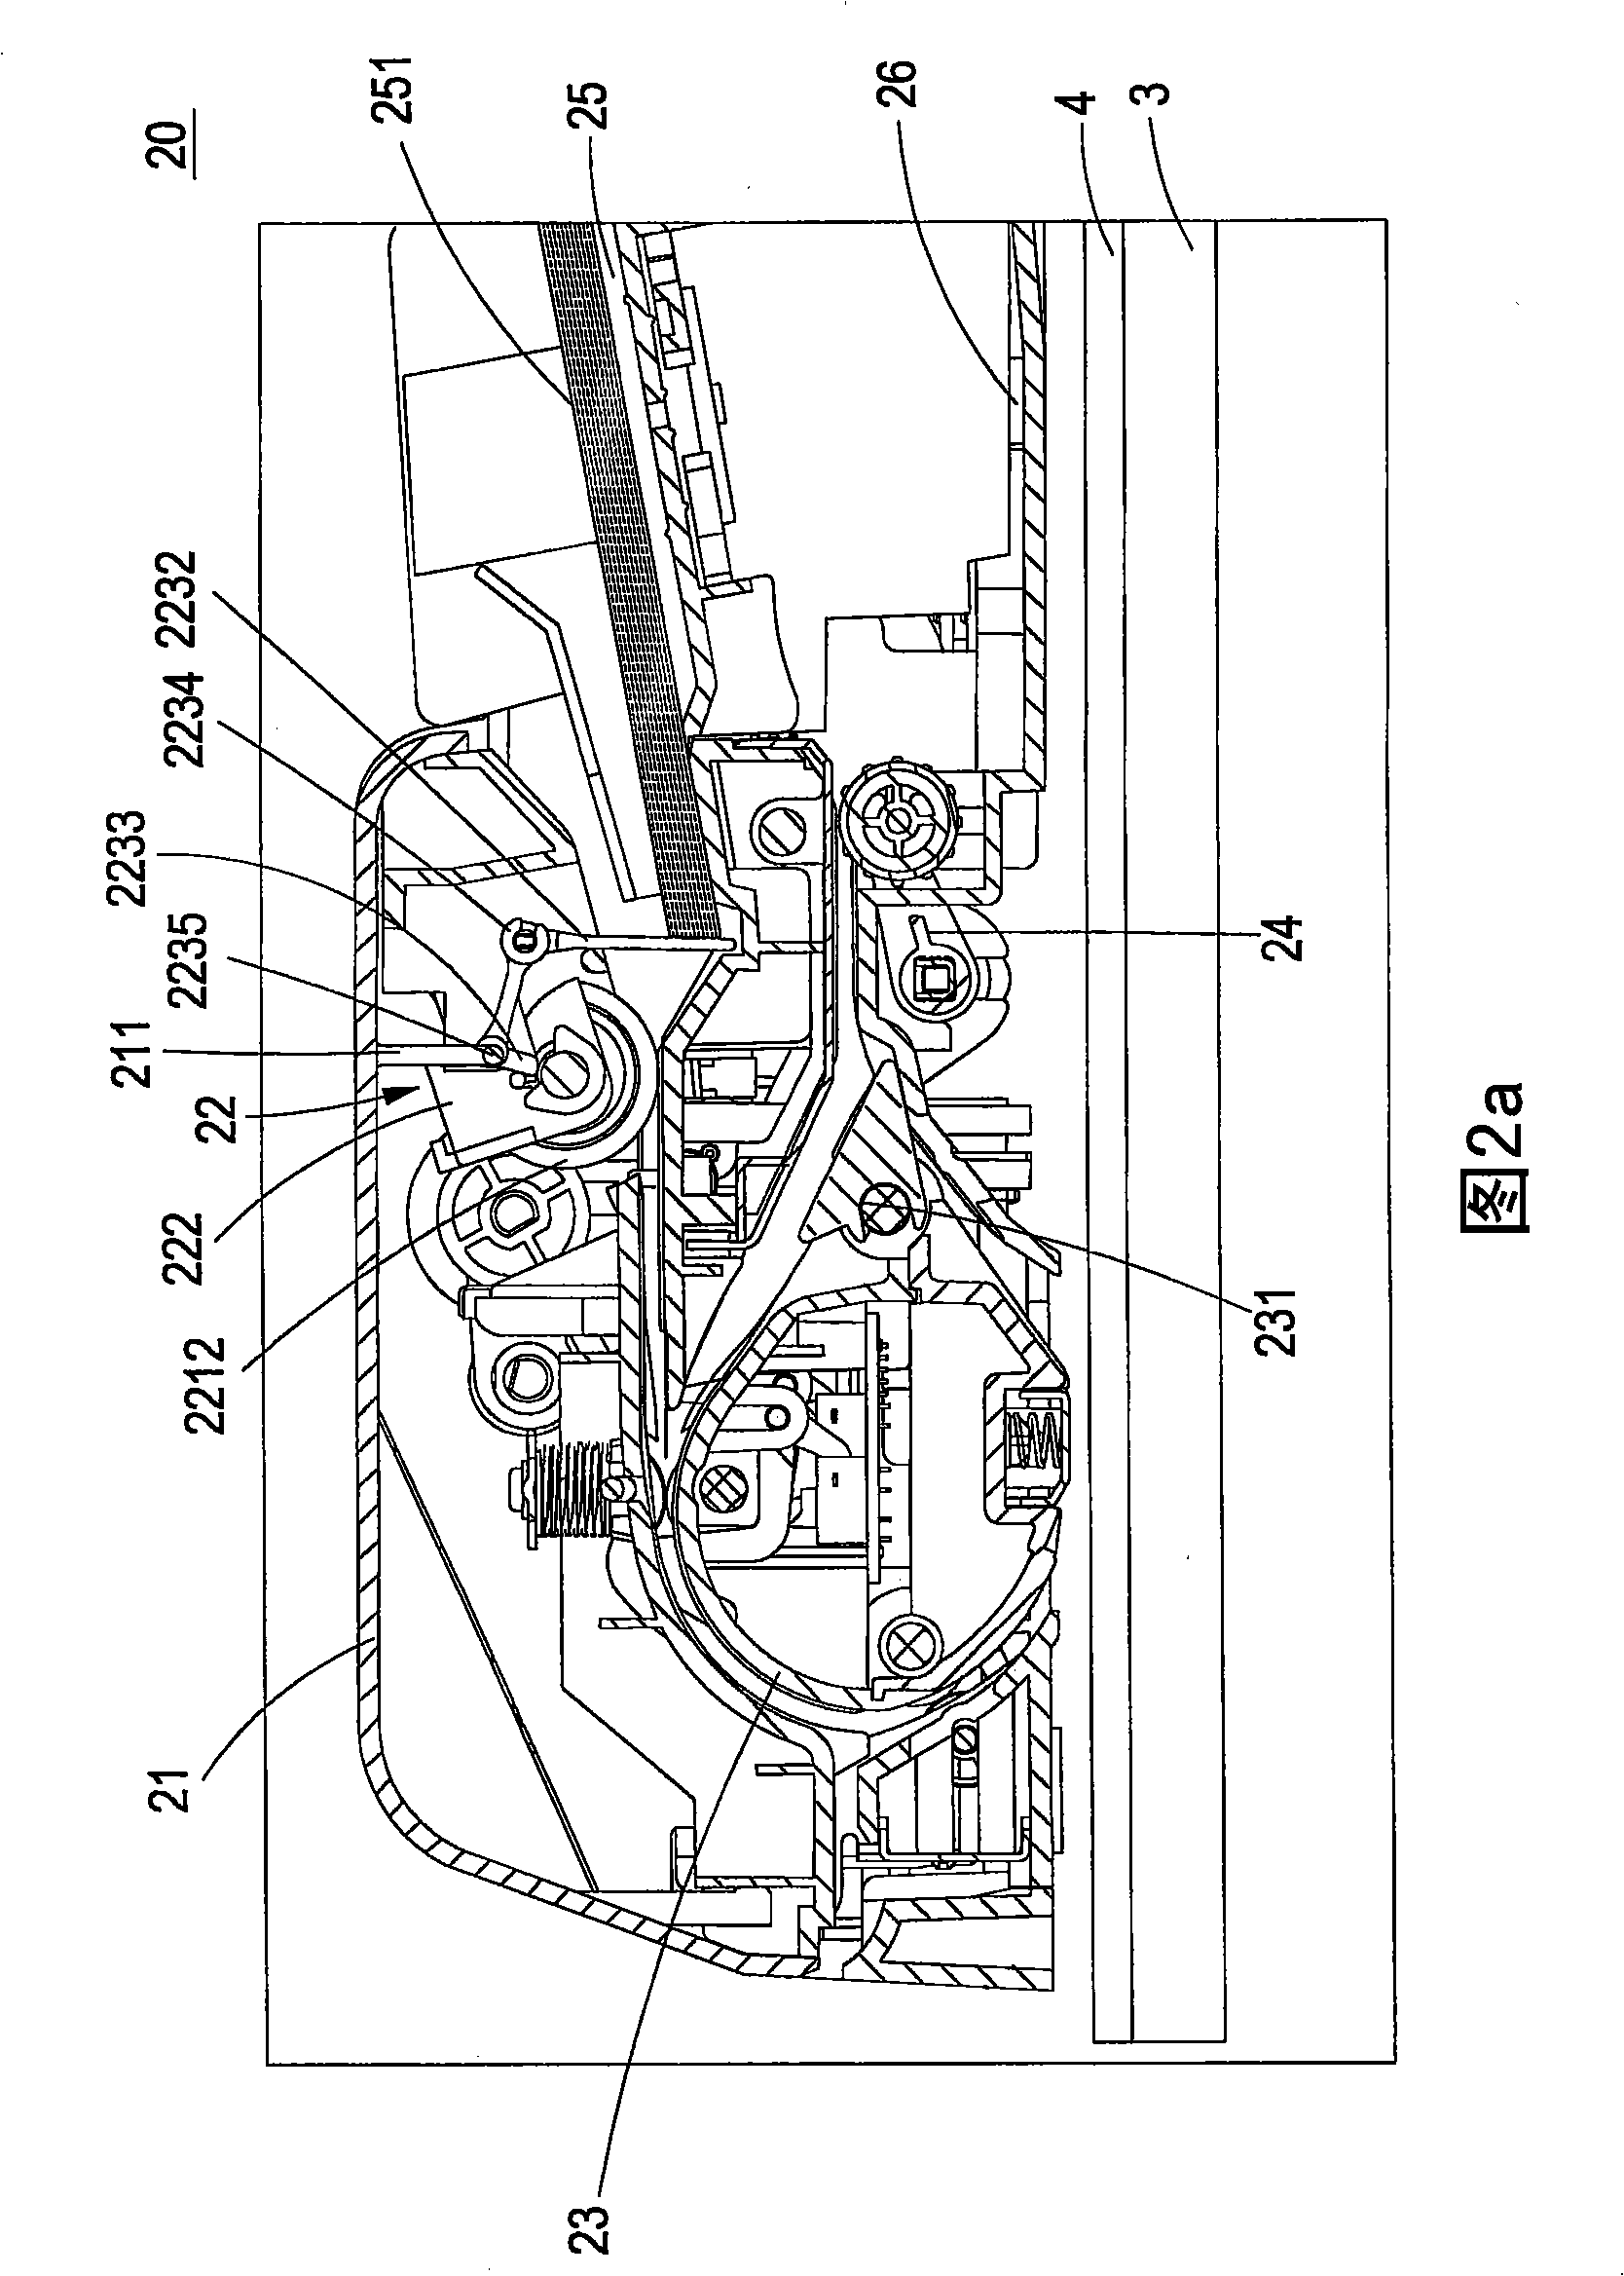 Sheet feeding mechanism and adaptable automatic paper feeder